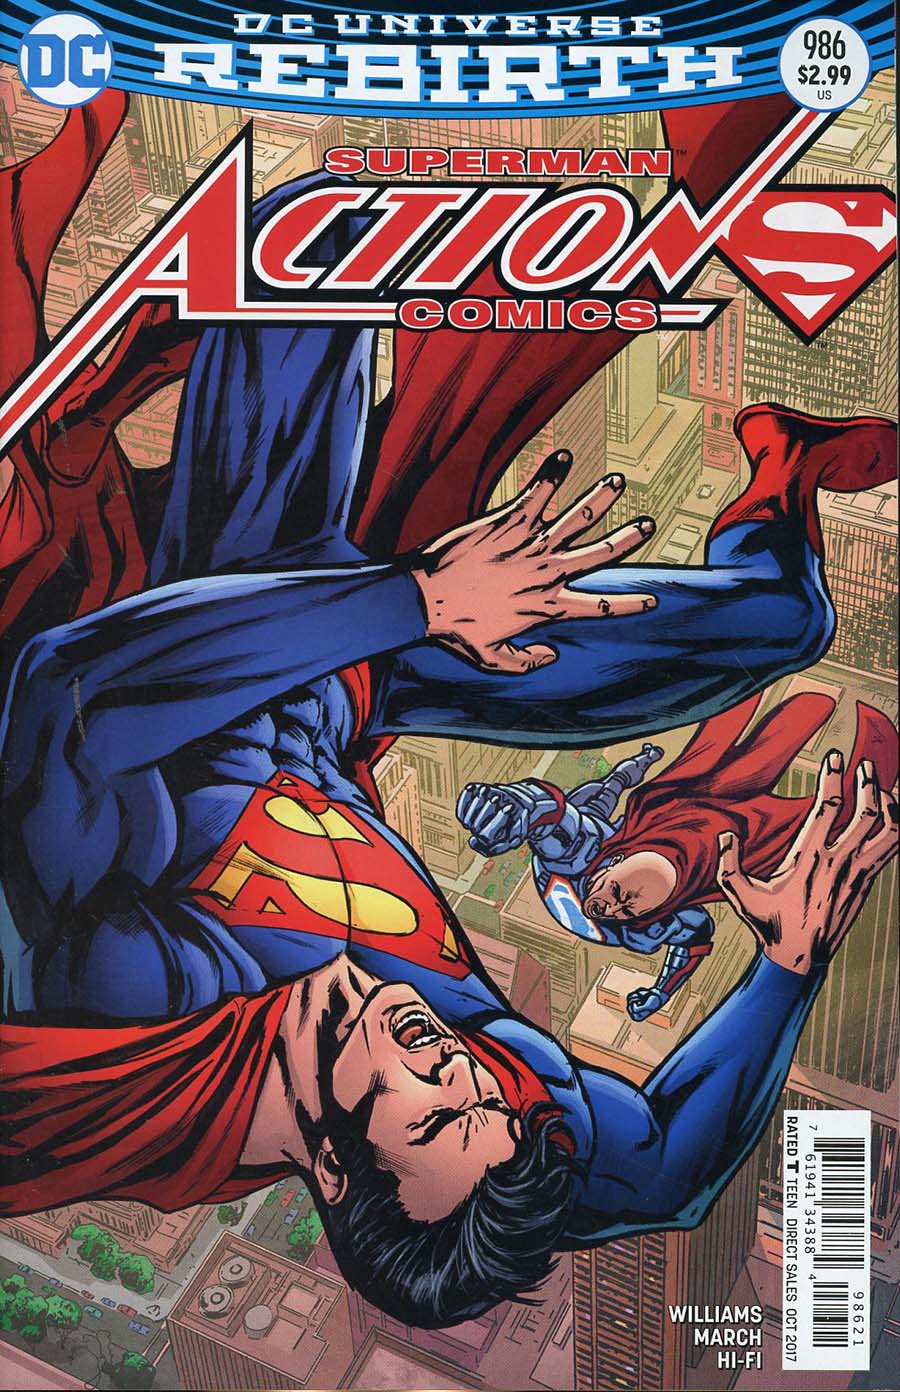 Action Comics Vol 2 #986 Cover B Variant Neil Edwards & Jay Leisten Cover